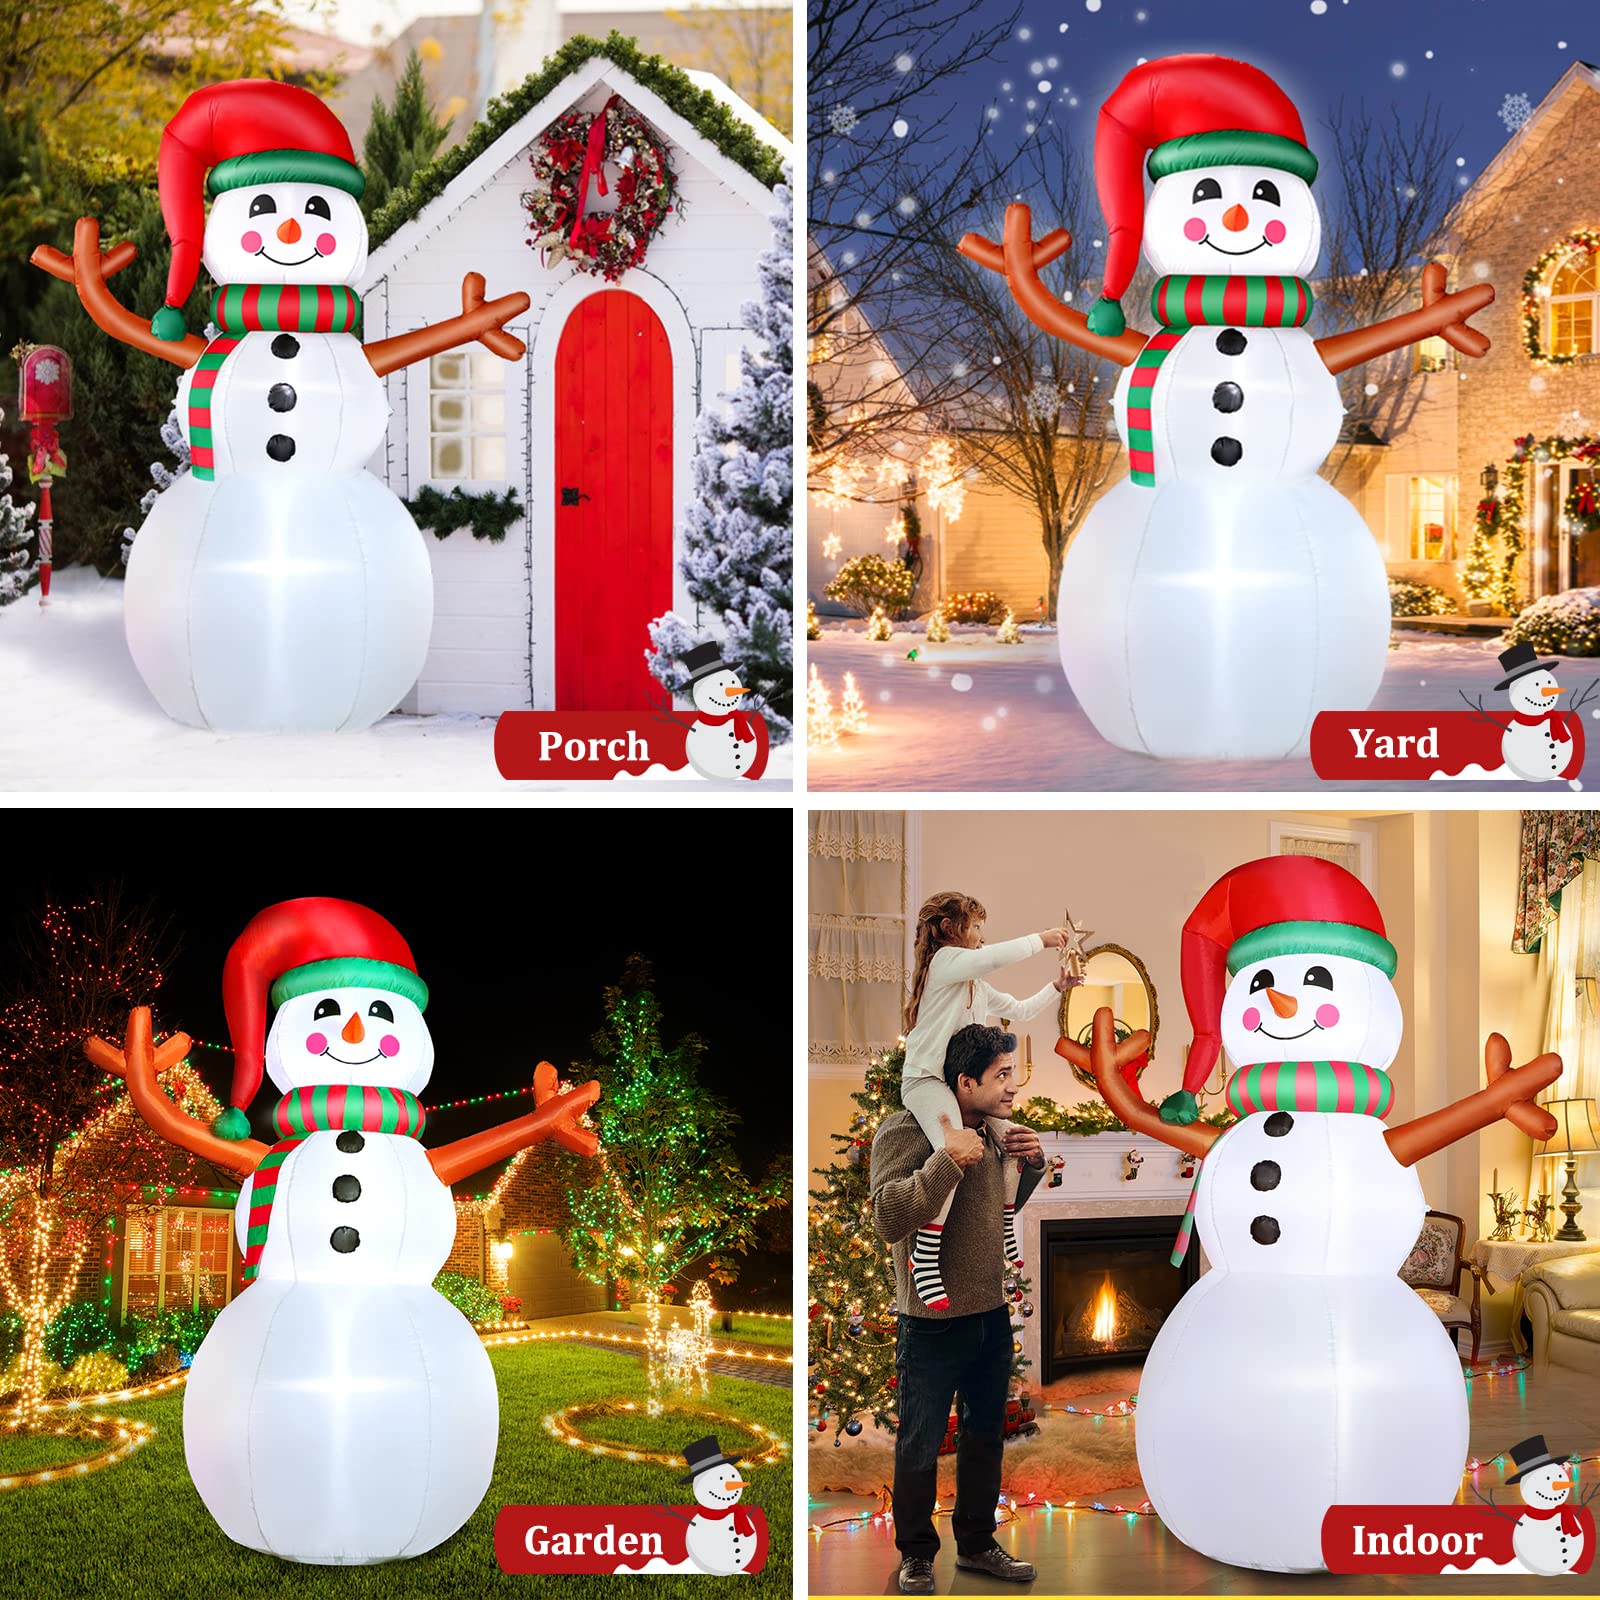 6FT Christmas Inflatables Snowman Outdoor Decoration, Blow up Snowman Yard Decoration with LED Lights Built-in, Holiday Decor for Xmas Party Indoor Outside Garden Lawn Porch